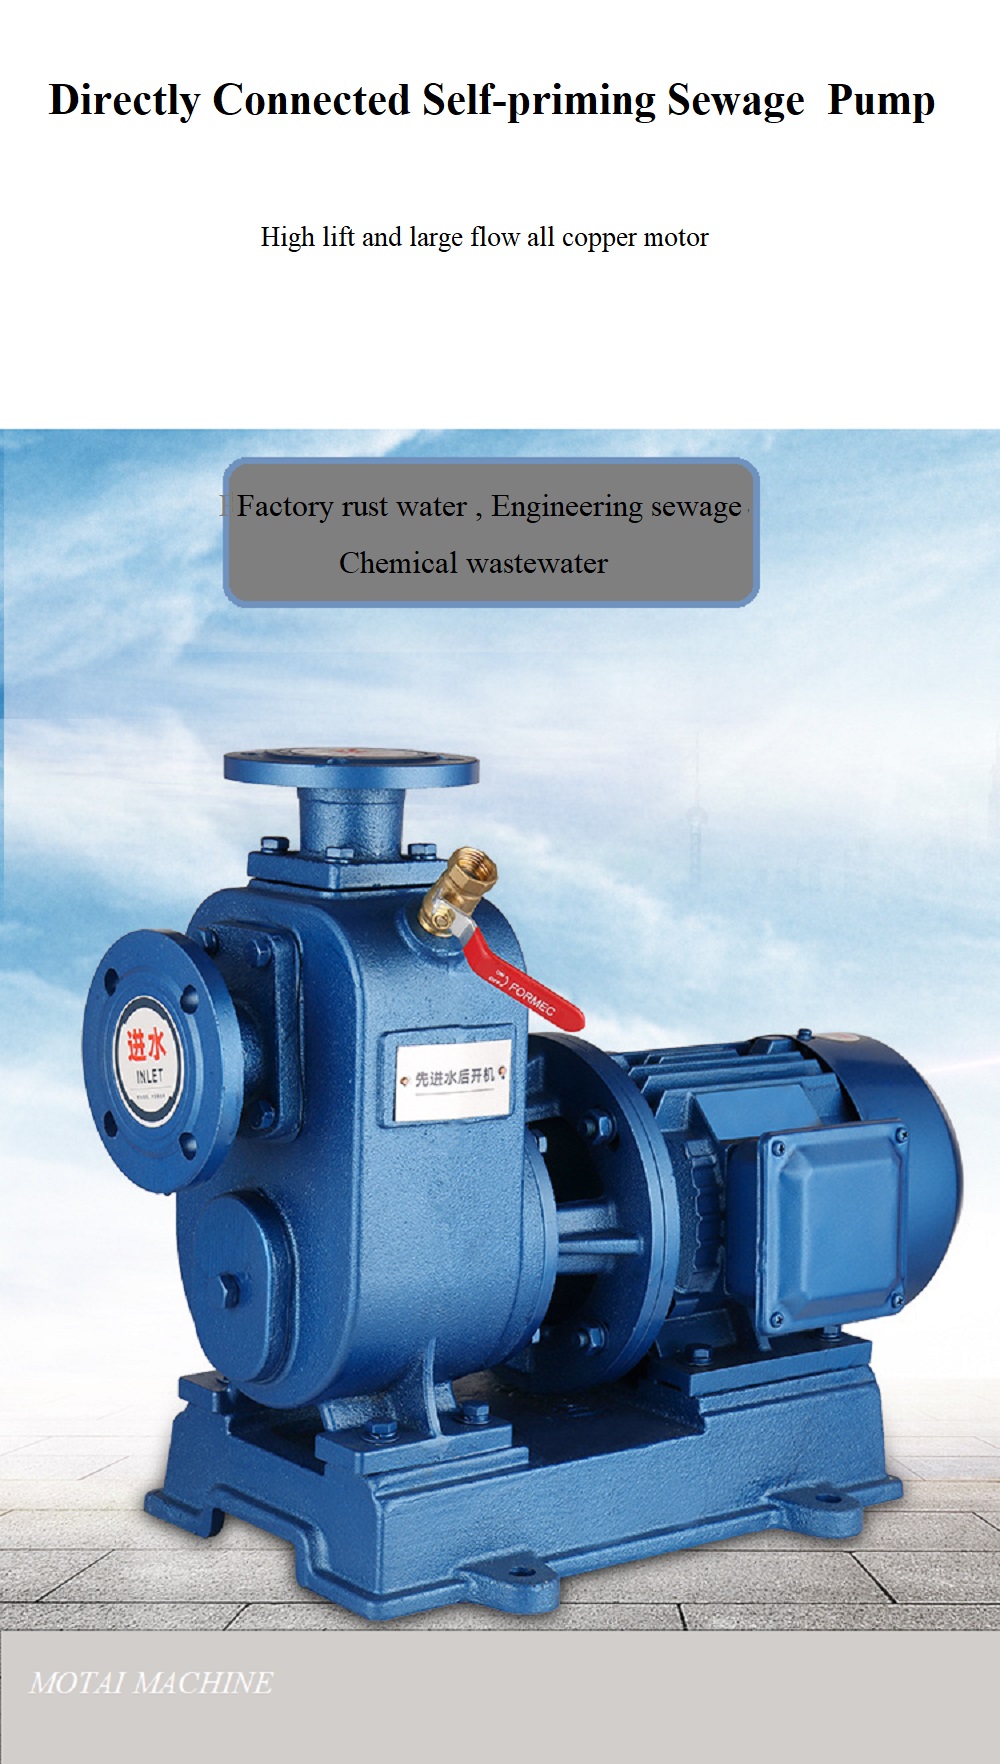 https://www.motaimachine.com/portable-variable-frequency-permanent-magnet-pump-product/